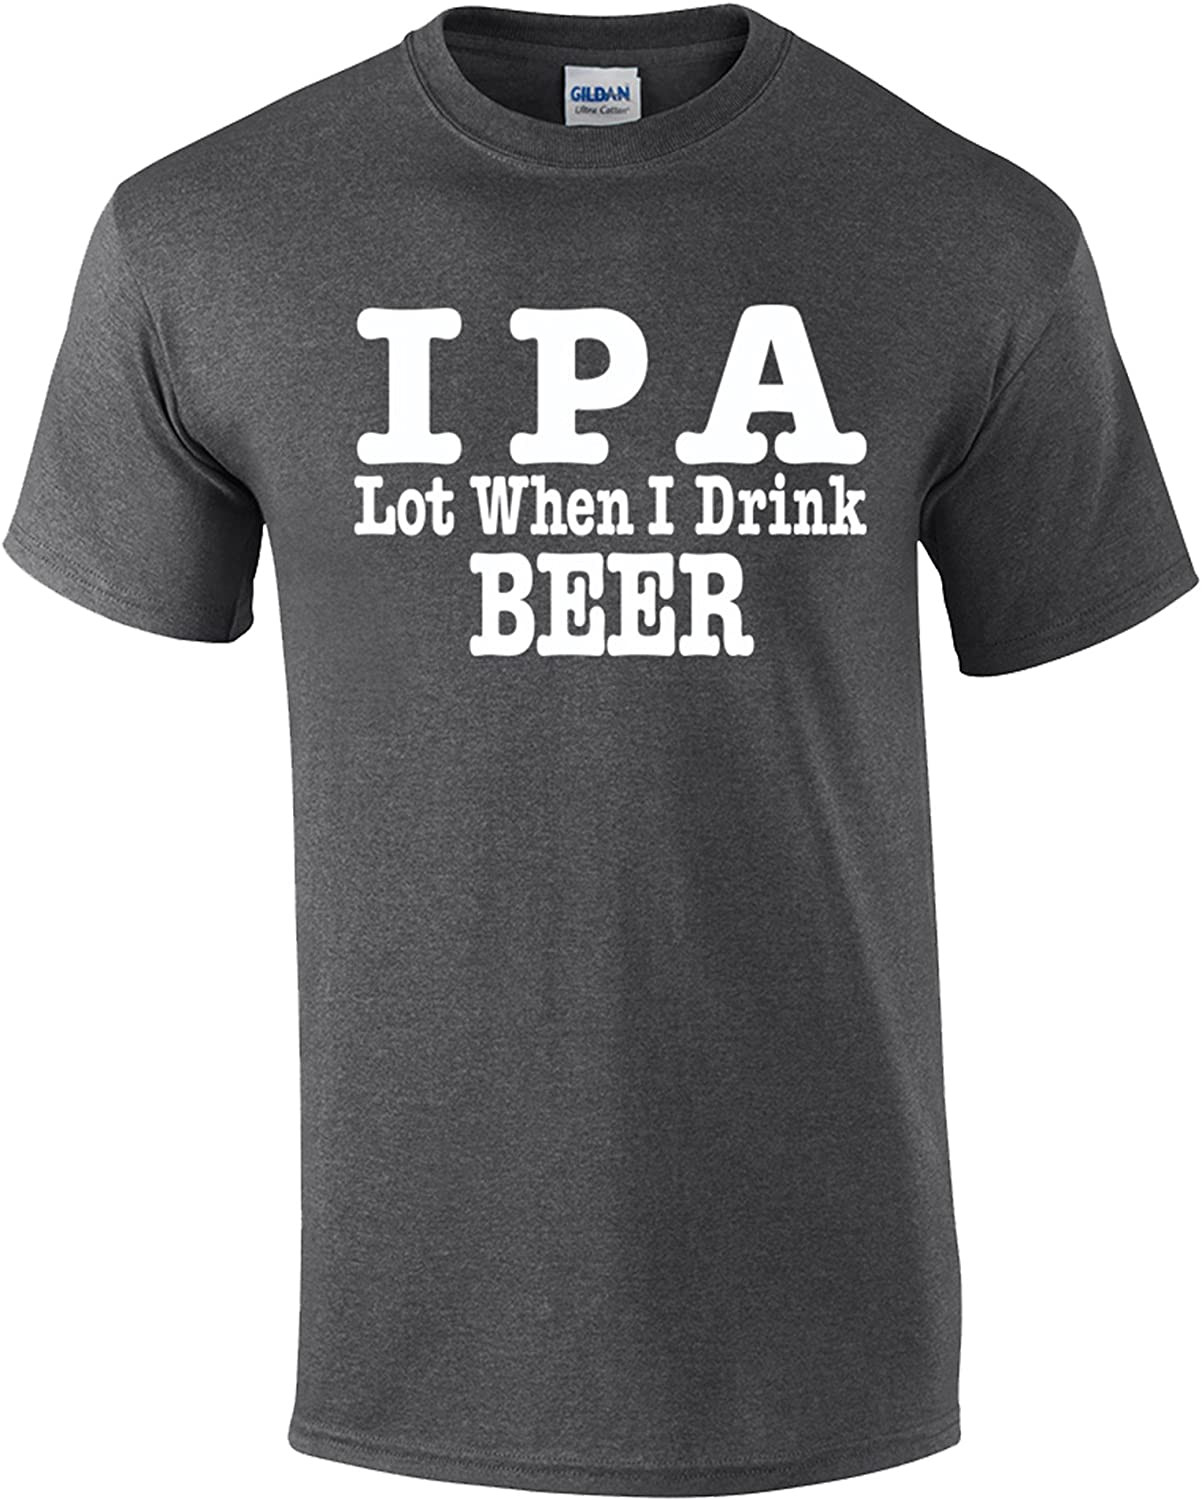 Funny IPA Lot When I Drink Beer Graphic T-Shirt